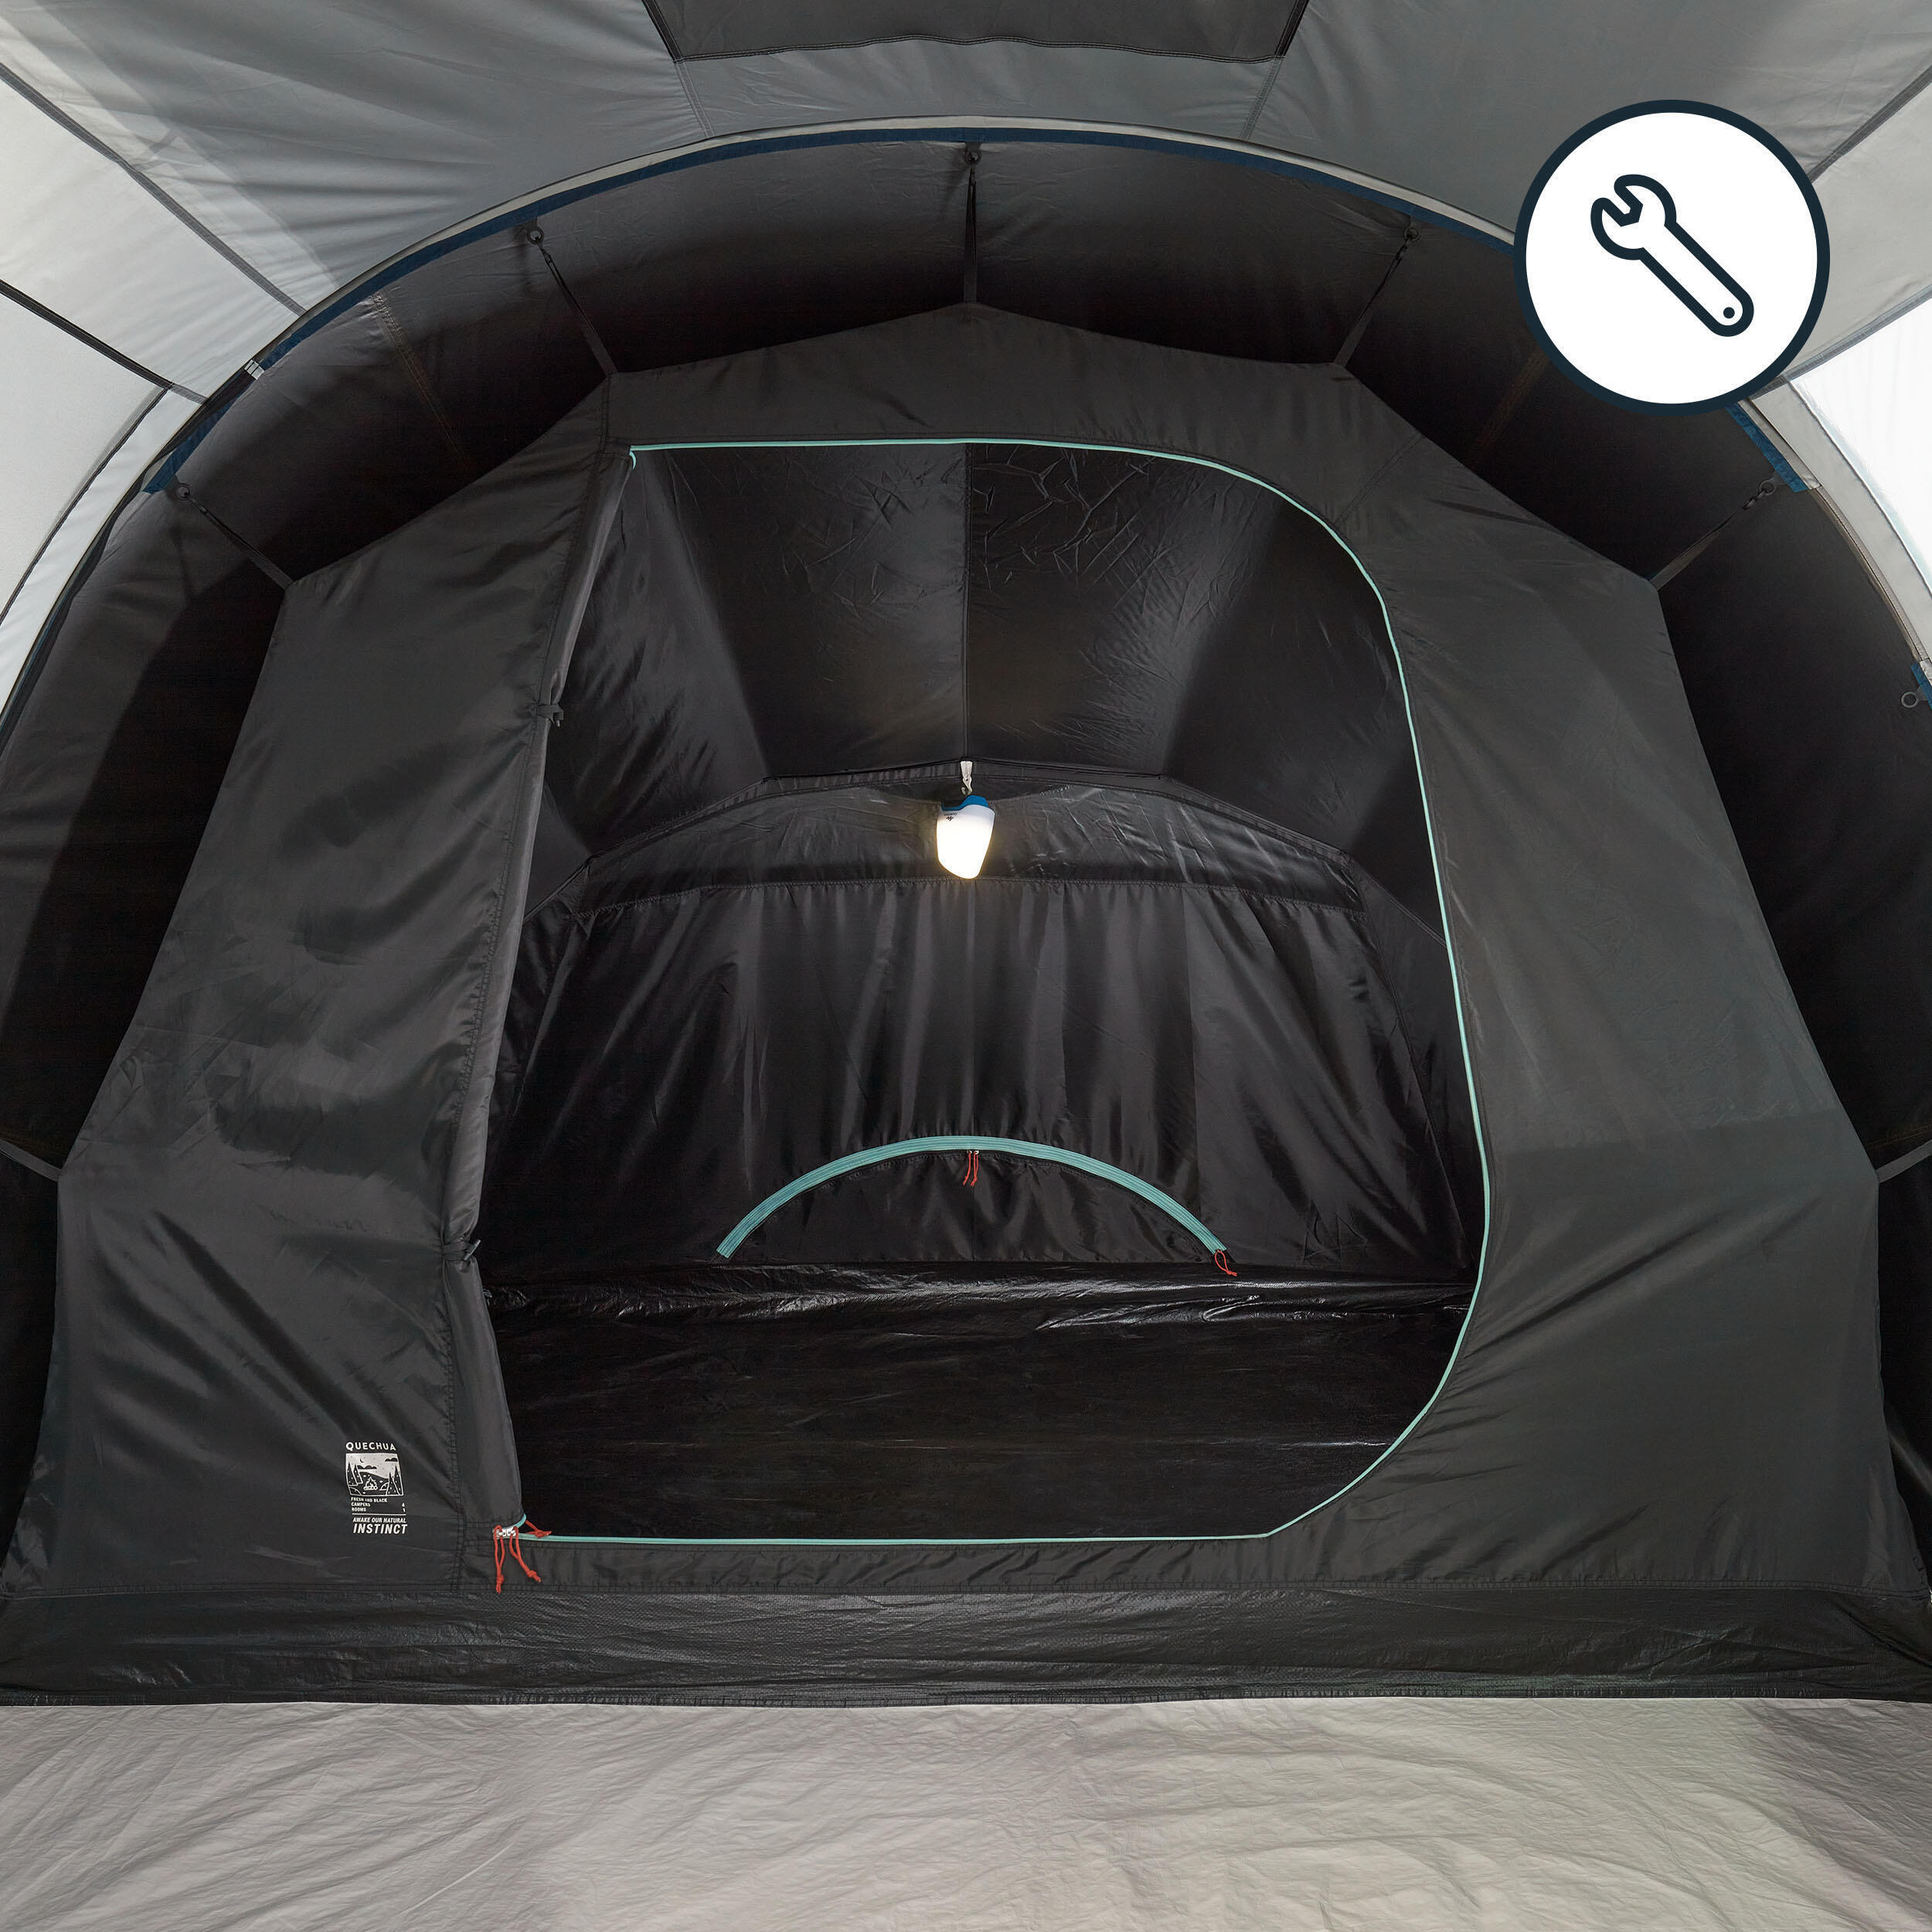 BEDROOM AND GROUNDSHEET - SPARE PART FOR THE ARPENAZ 4.1 FRESH&BLACK TENT 1/1